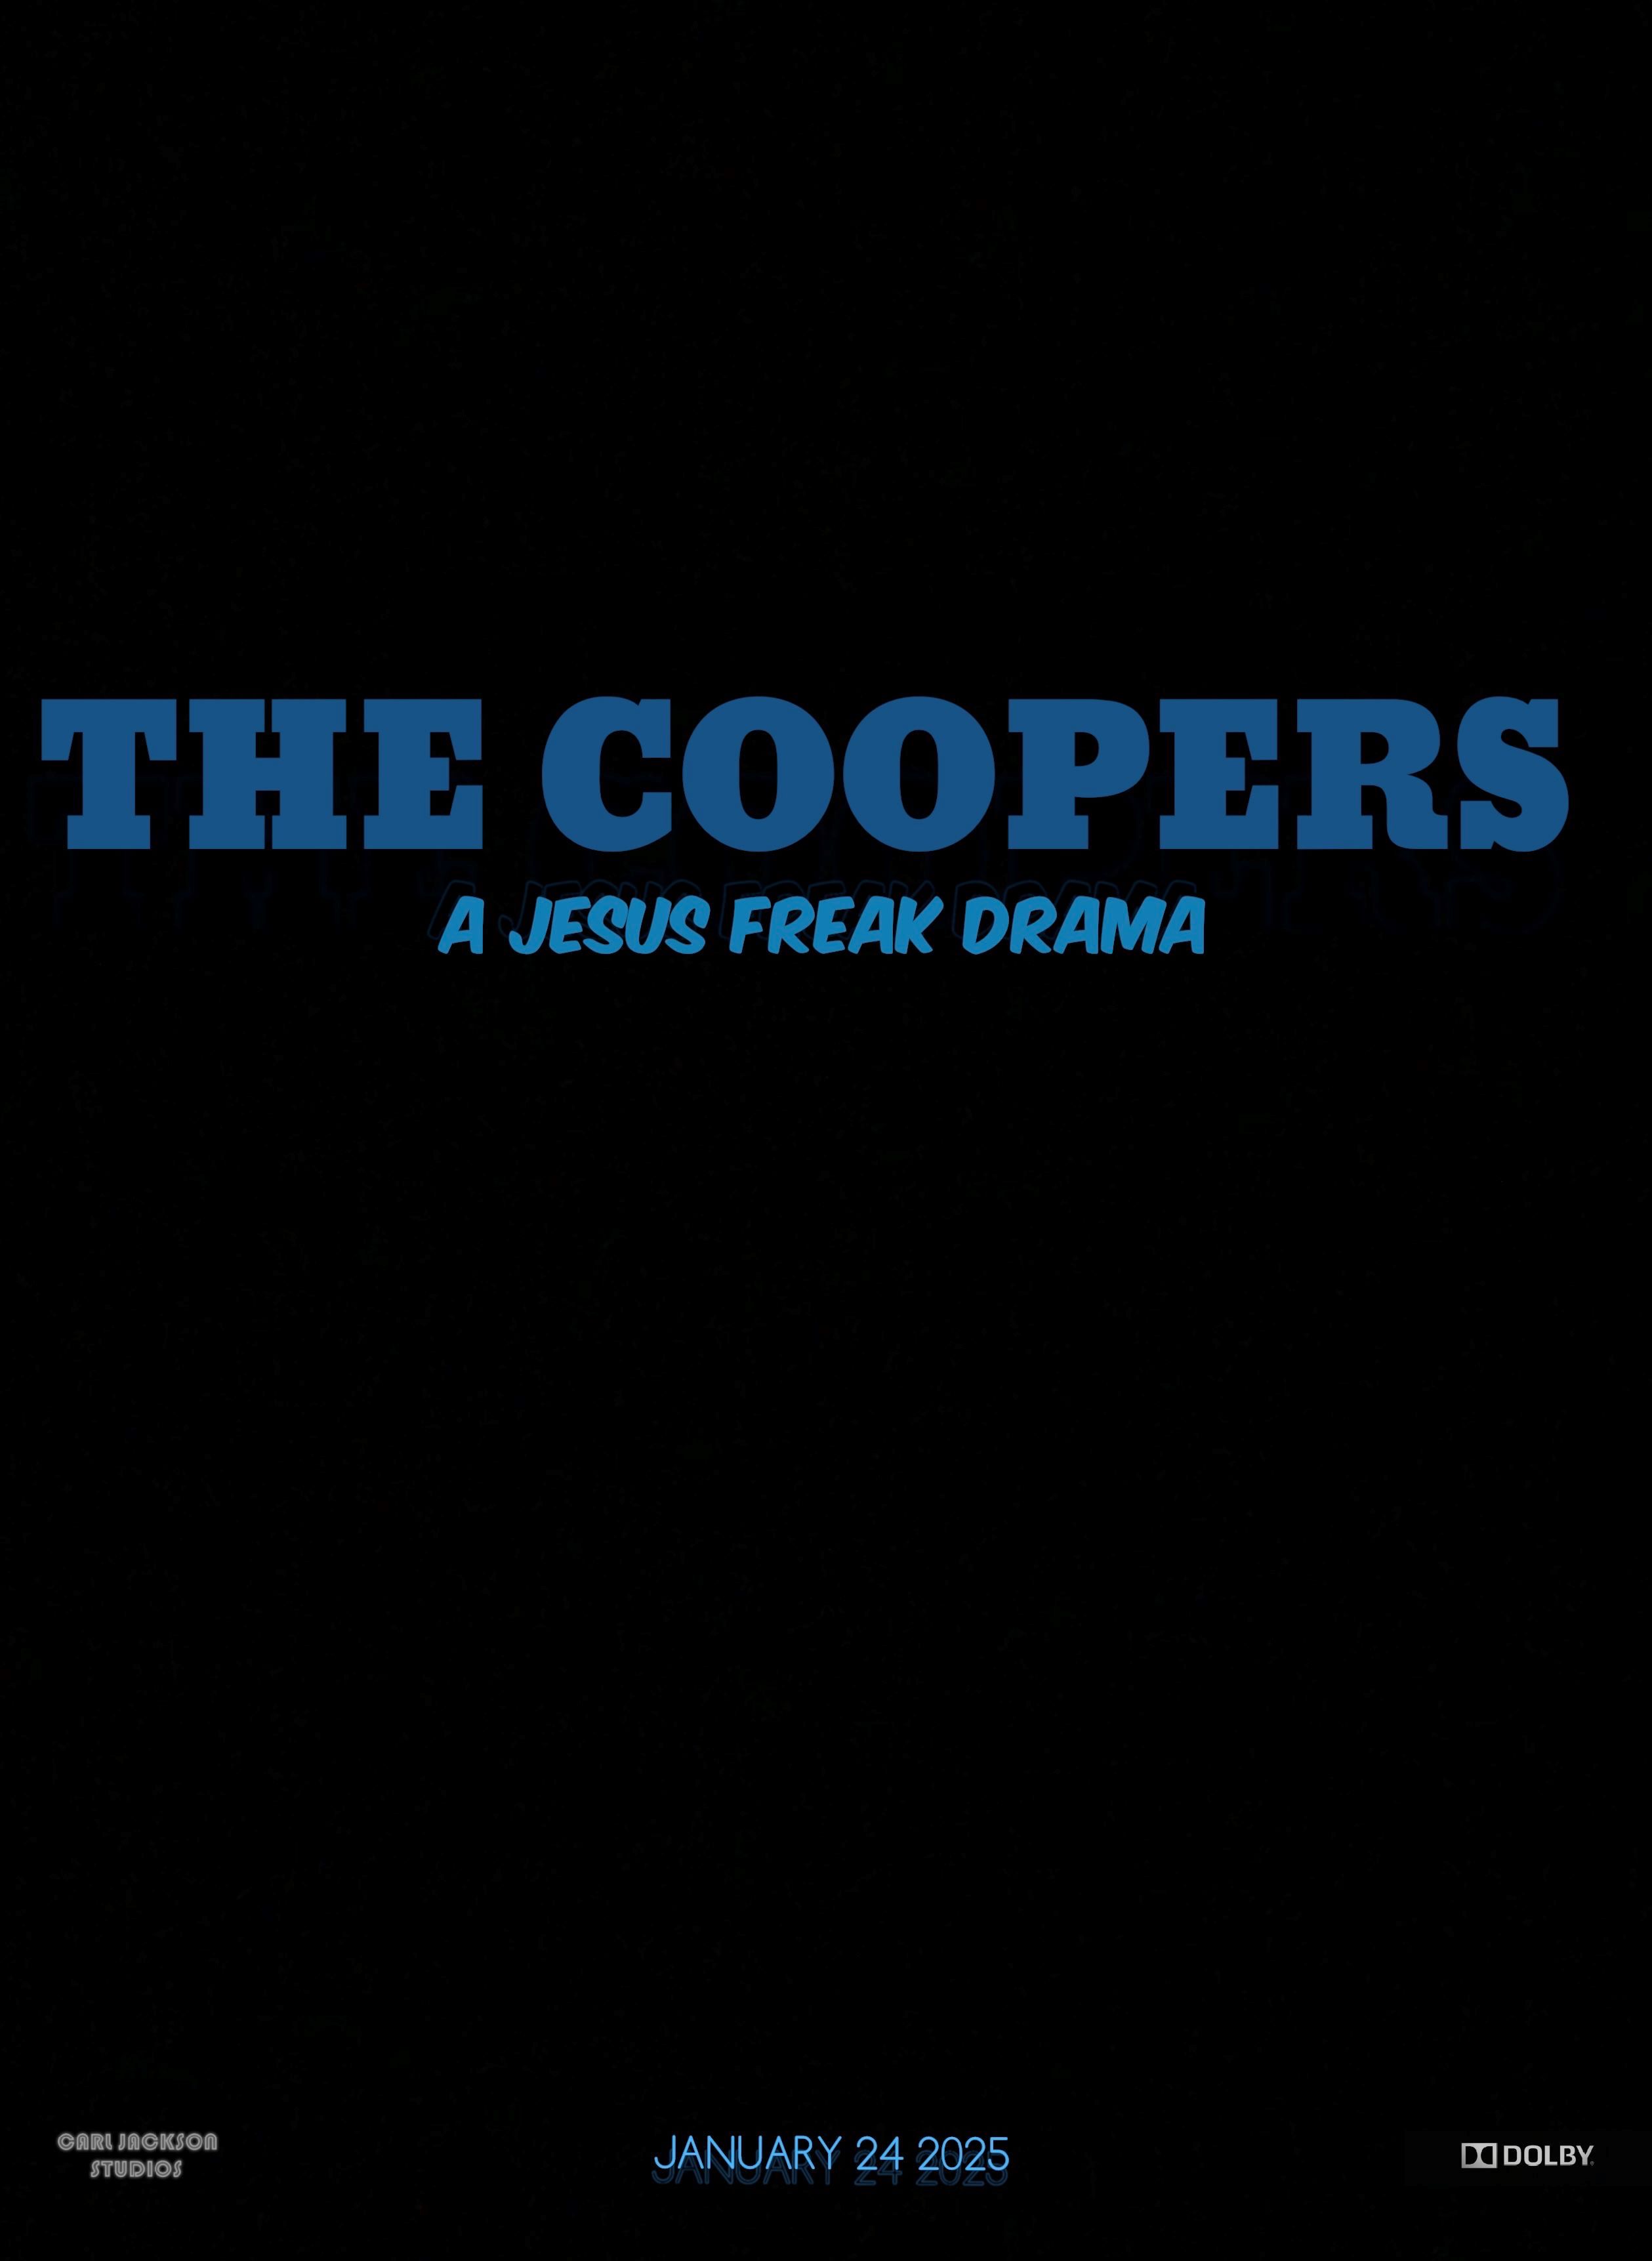 The Coopers: A Jesus Freak Drama